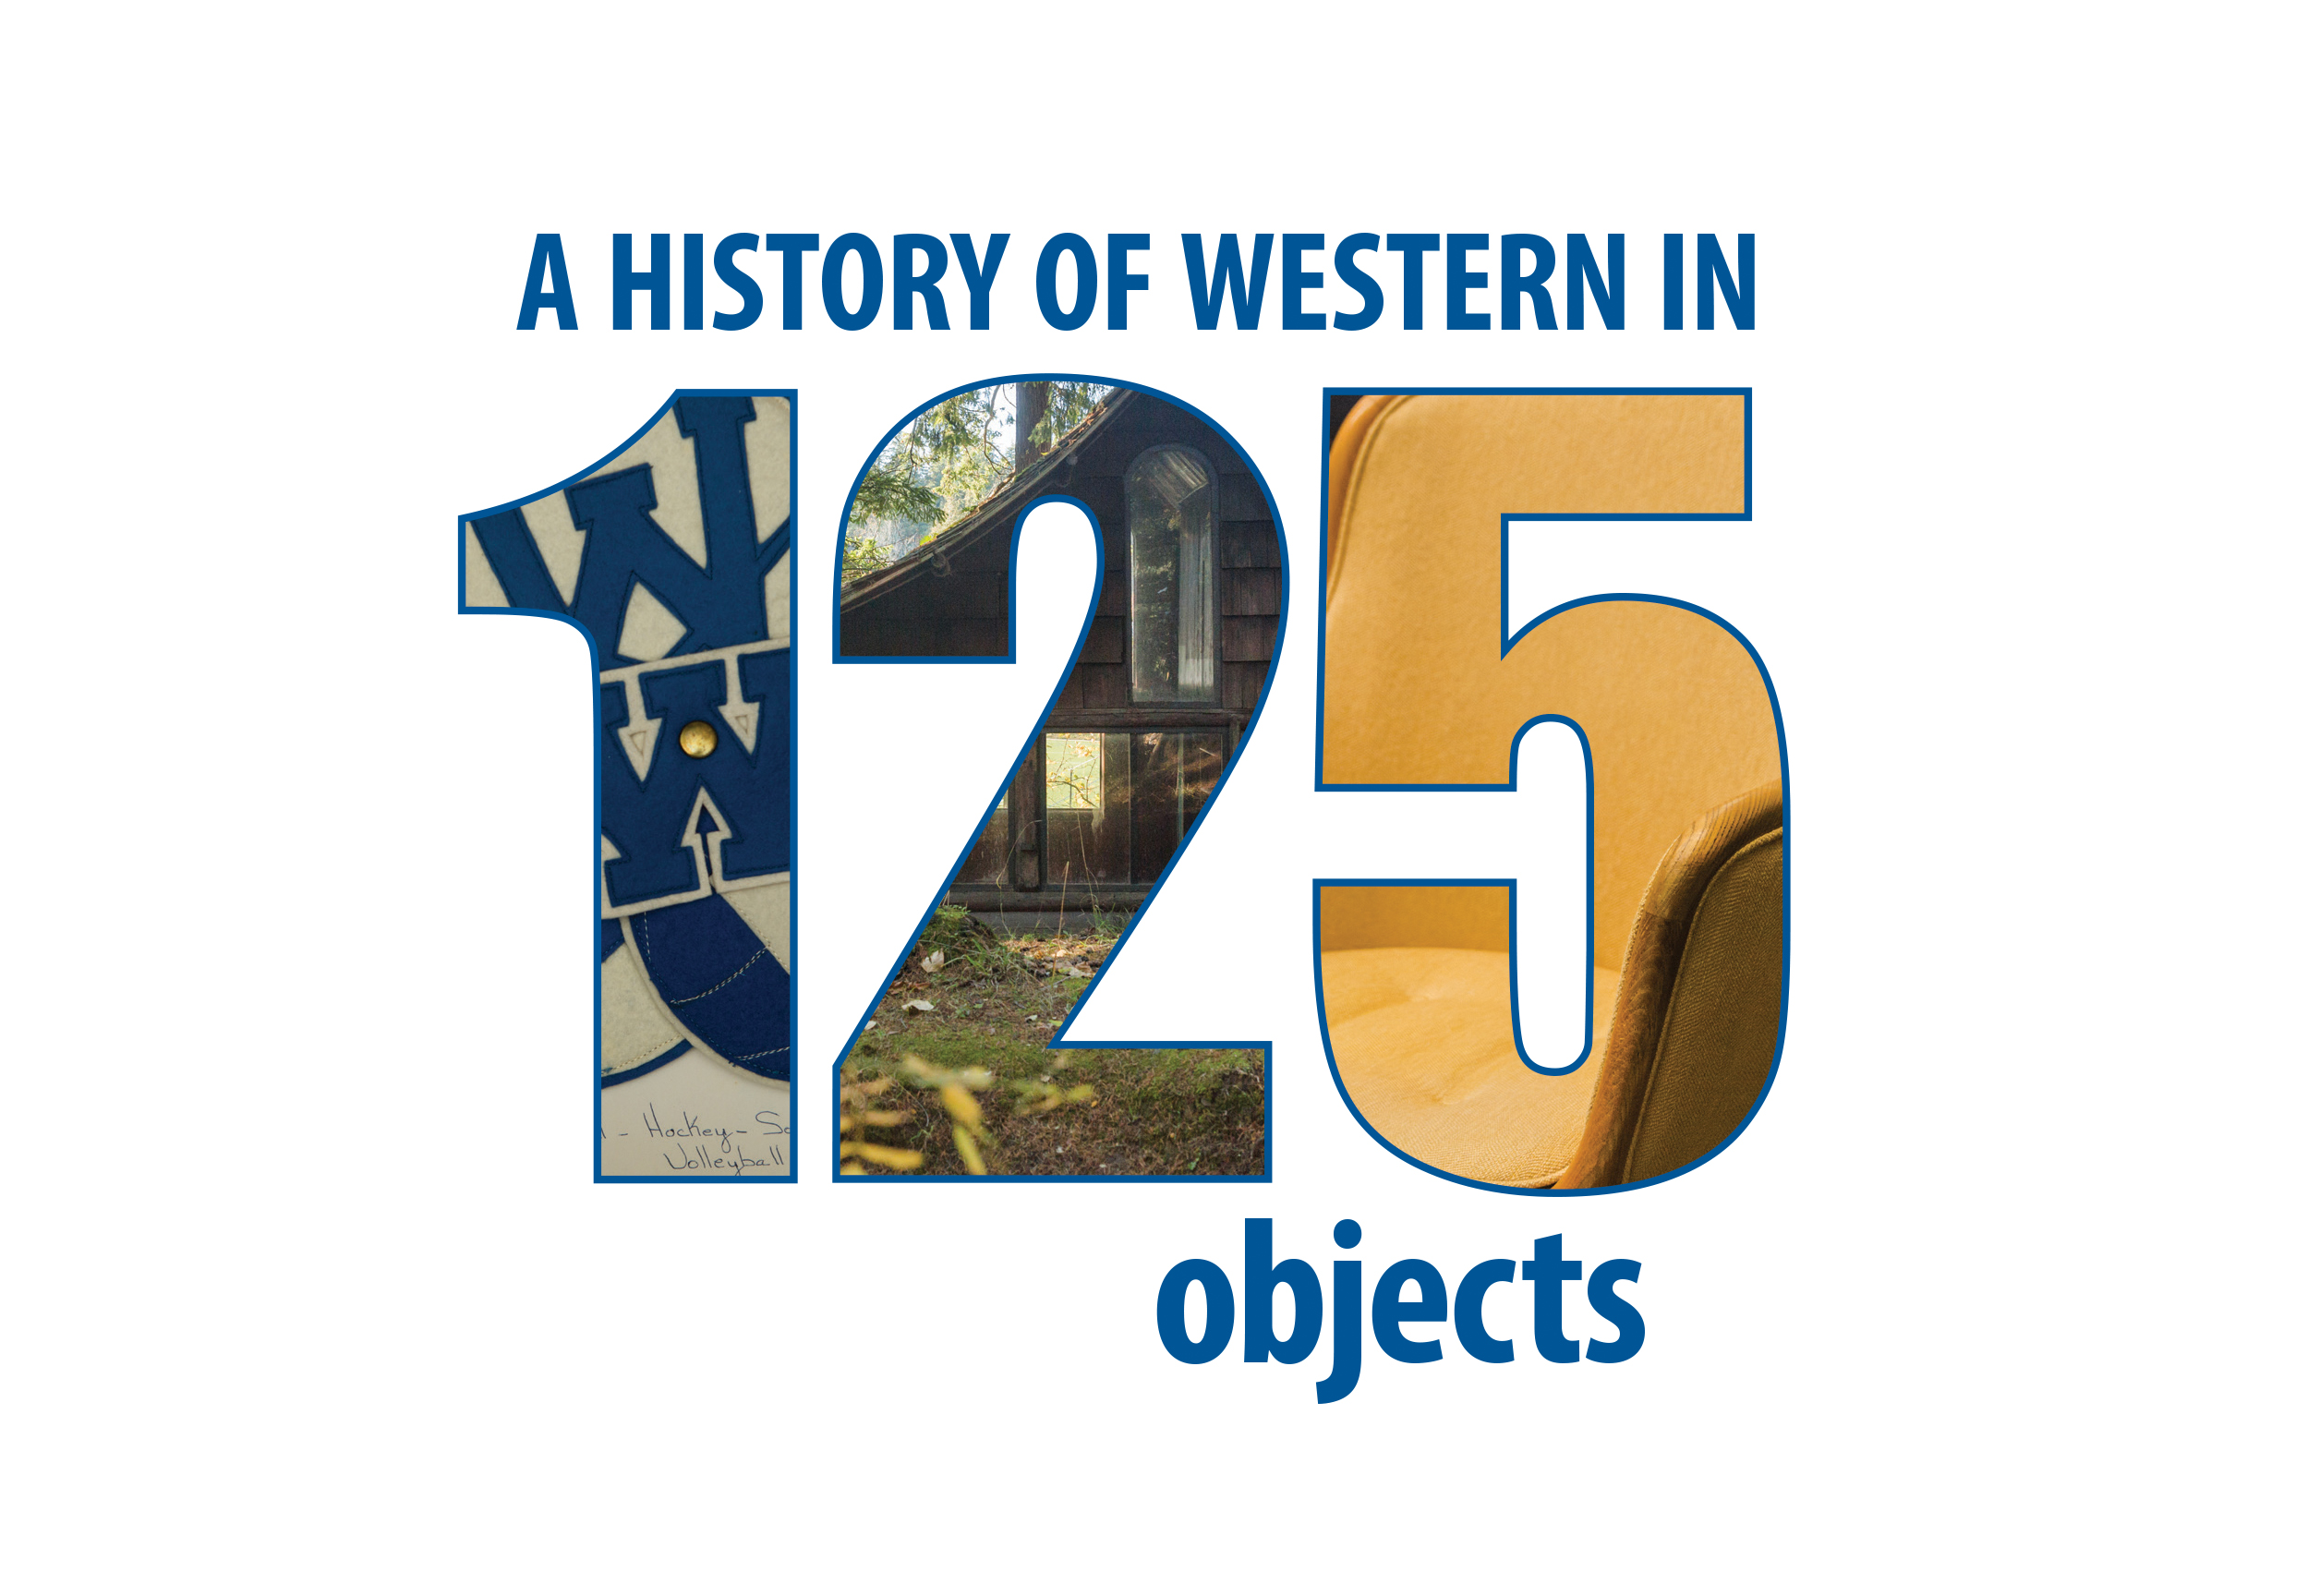 A History of Western in 125 Objects